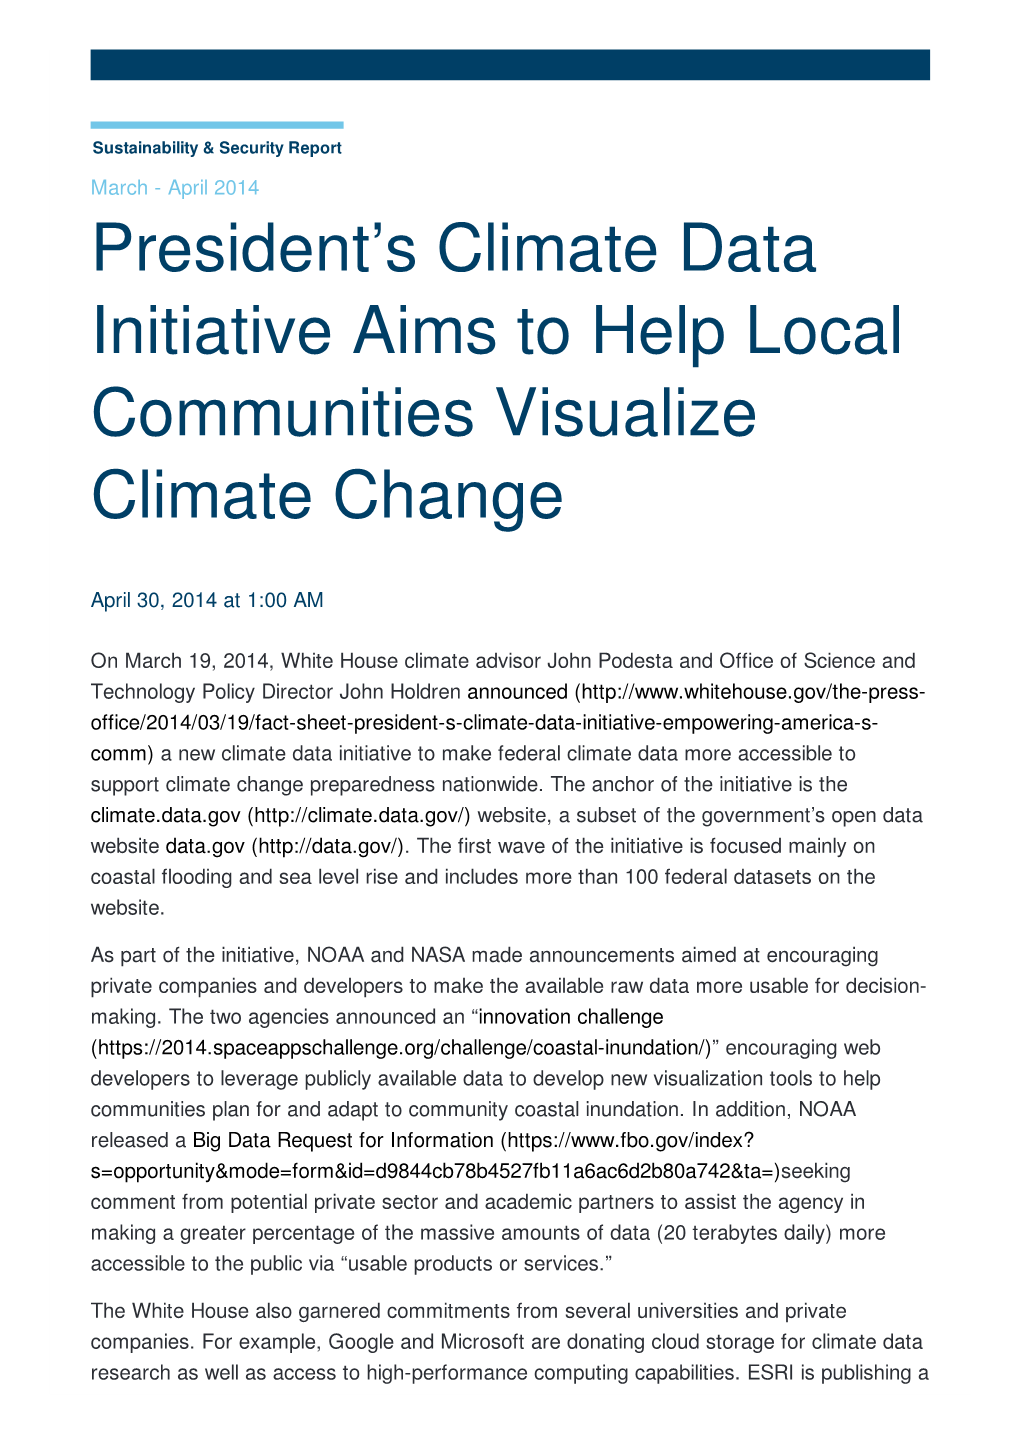 President's Climate Data Initiative Aims to Help Local Communities